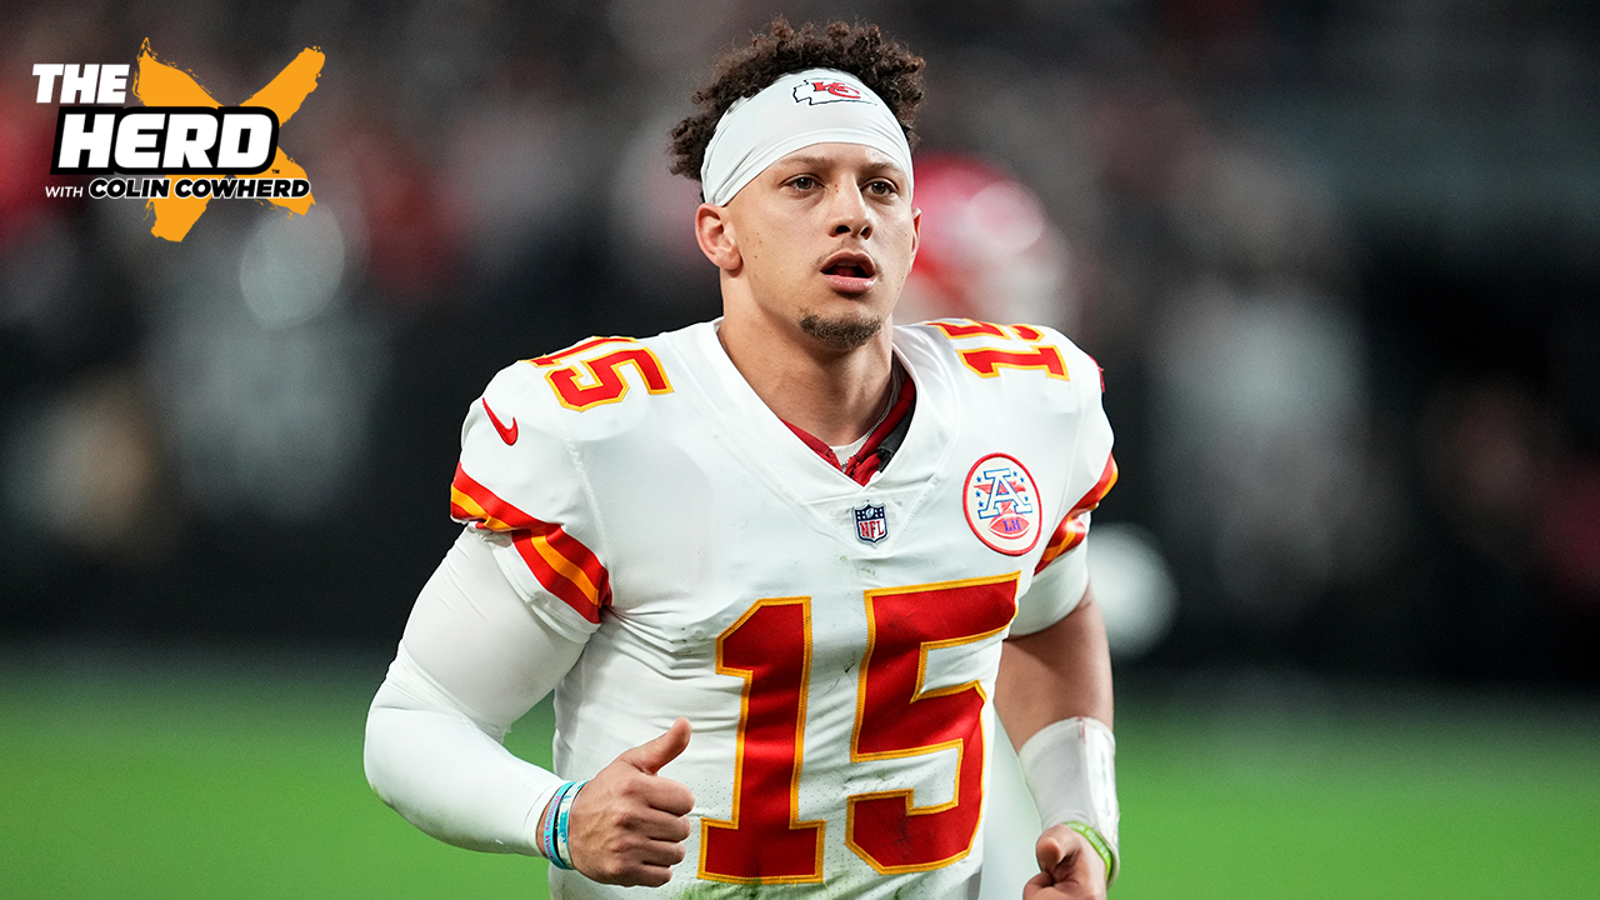 Is Patrick Mahomes the clear favorite for the 2022 NFL MVP awards?